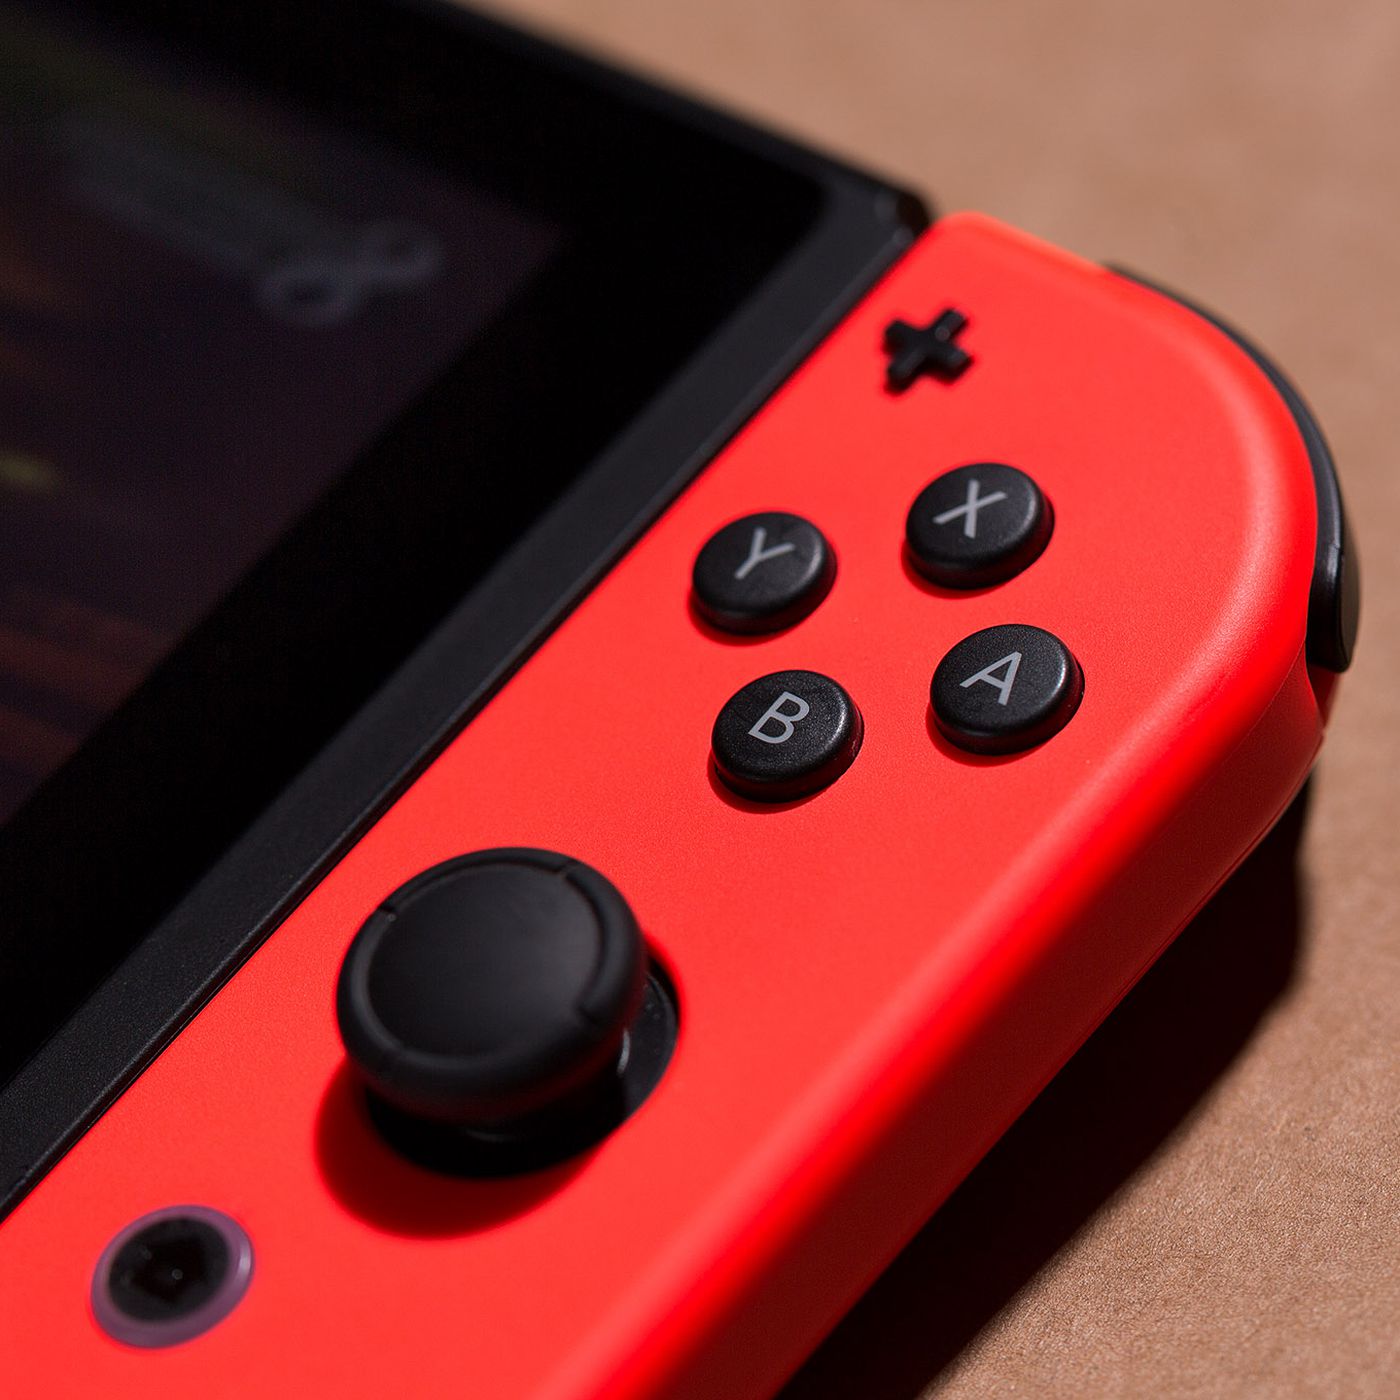 Nintendo S Nnid Hack Was Almost Twice As Big As First Reported The Verge